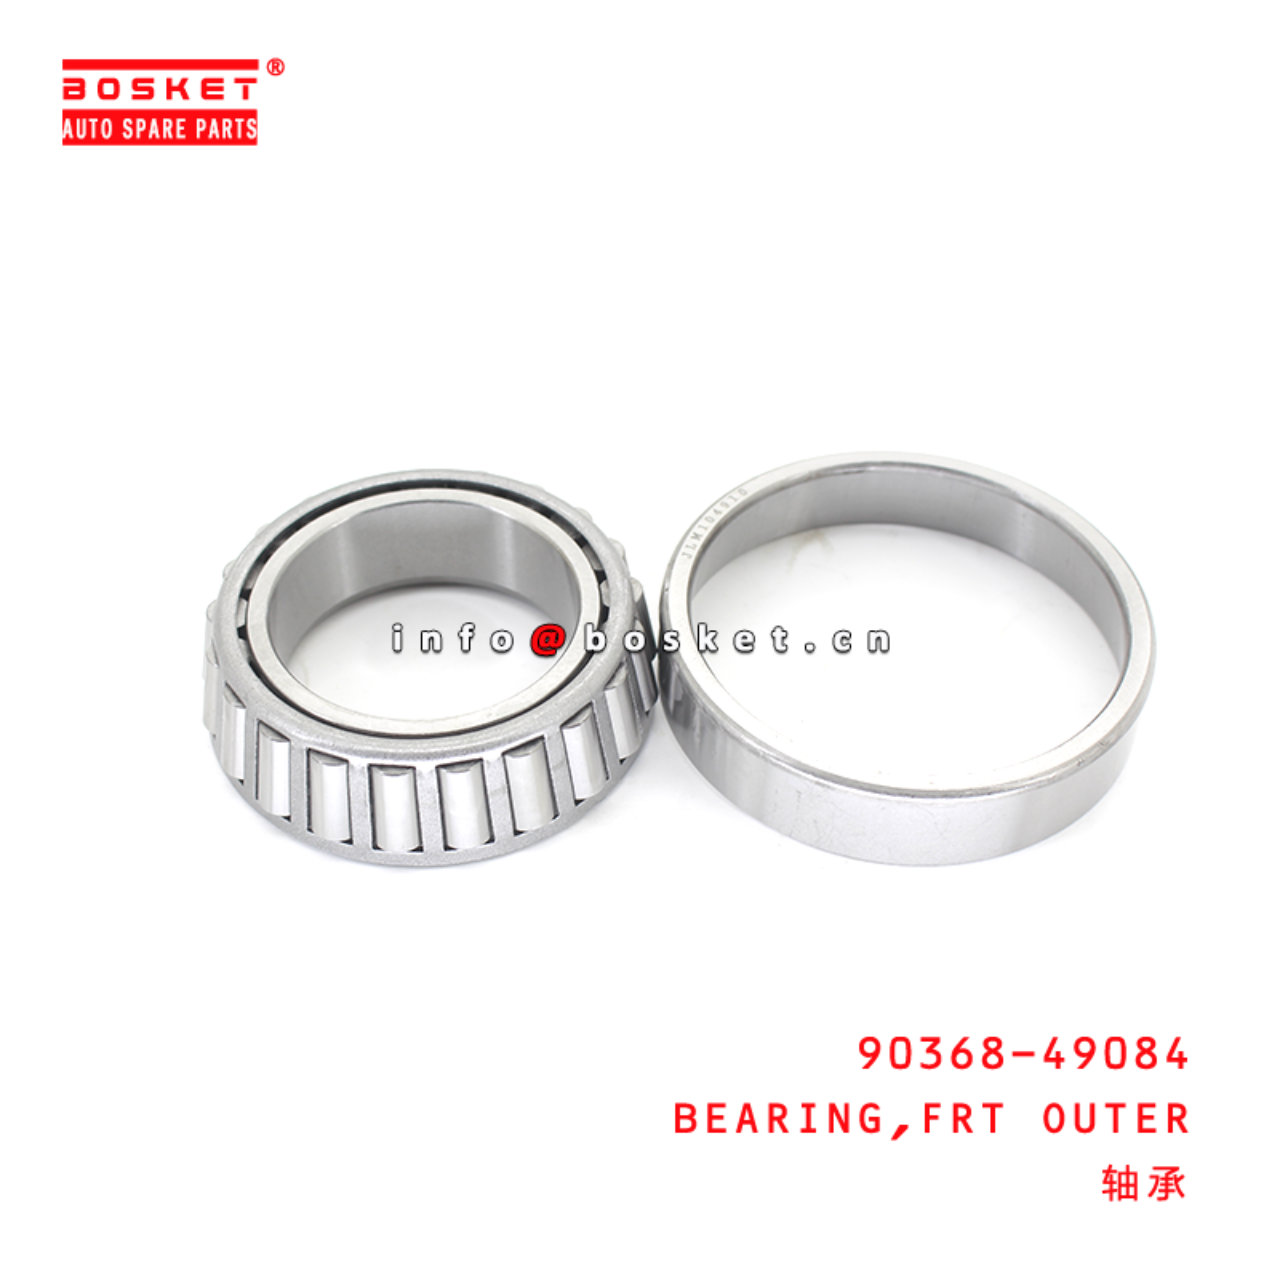 90368-49084 Outer Rear Bearing Suitable for ISUZU HINO700